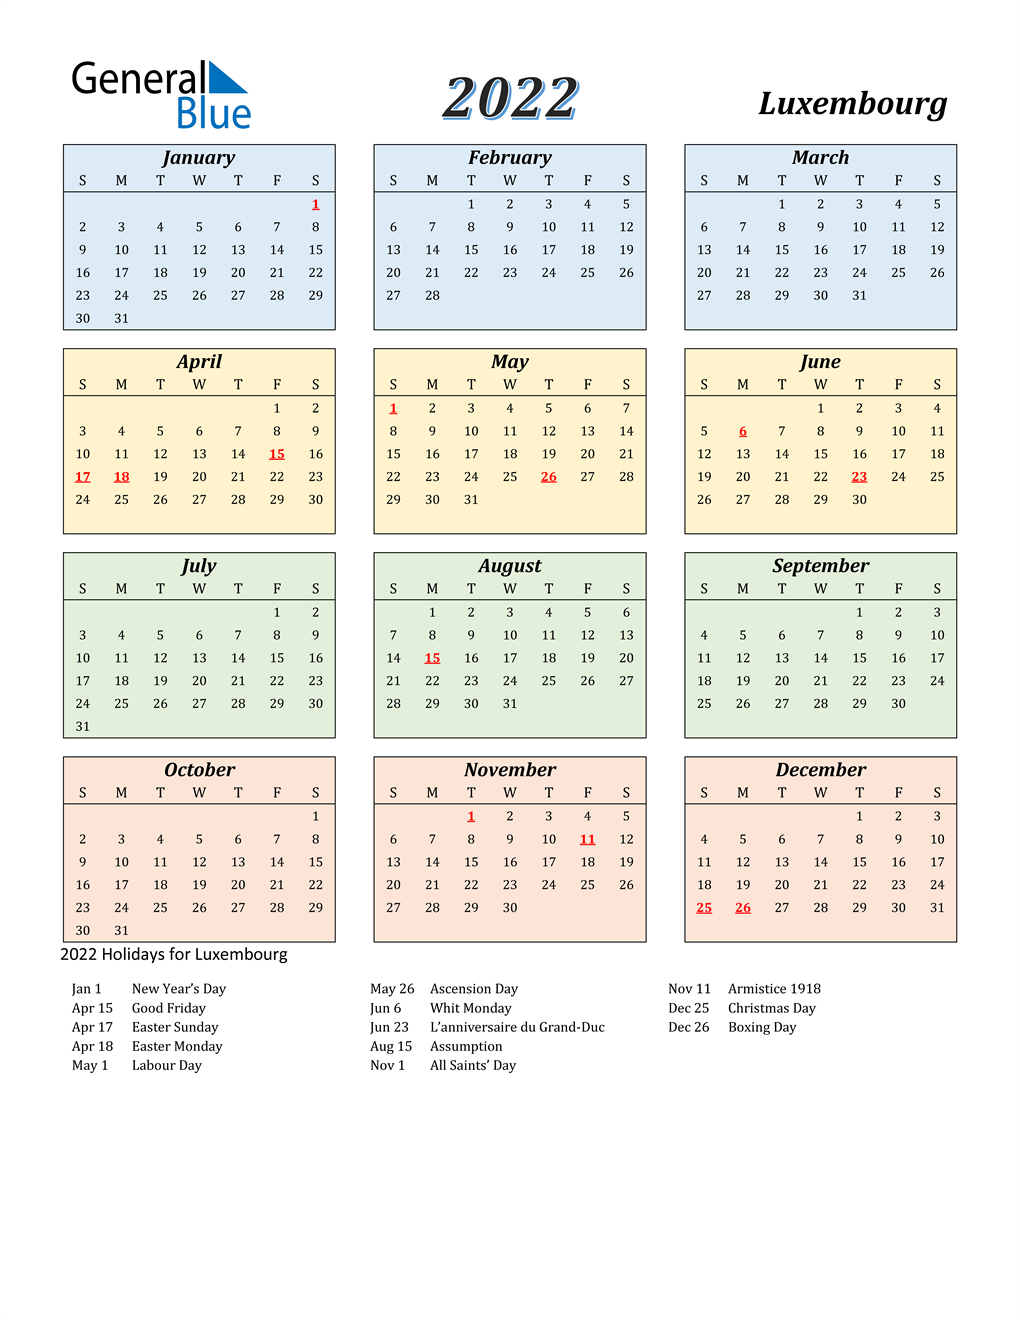 Holiday Calendar 2022 2022 Luxembourg Calendar With Holidays